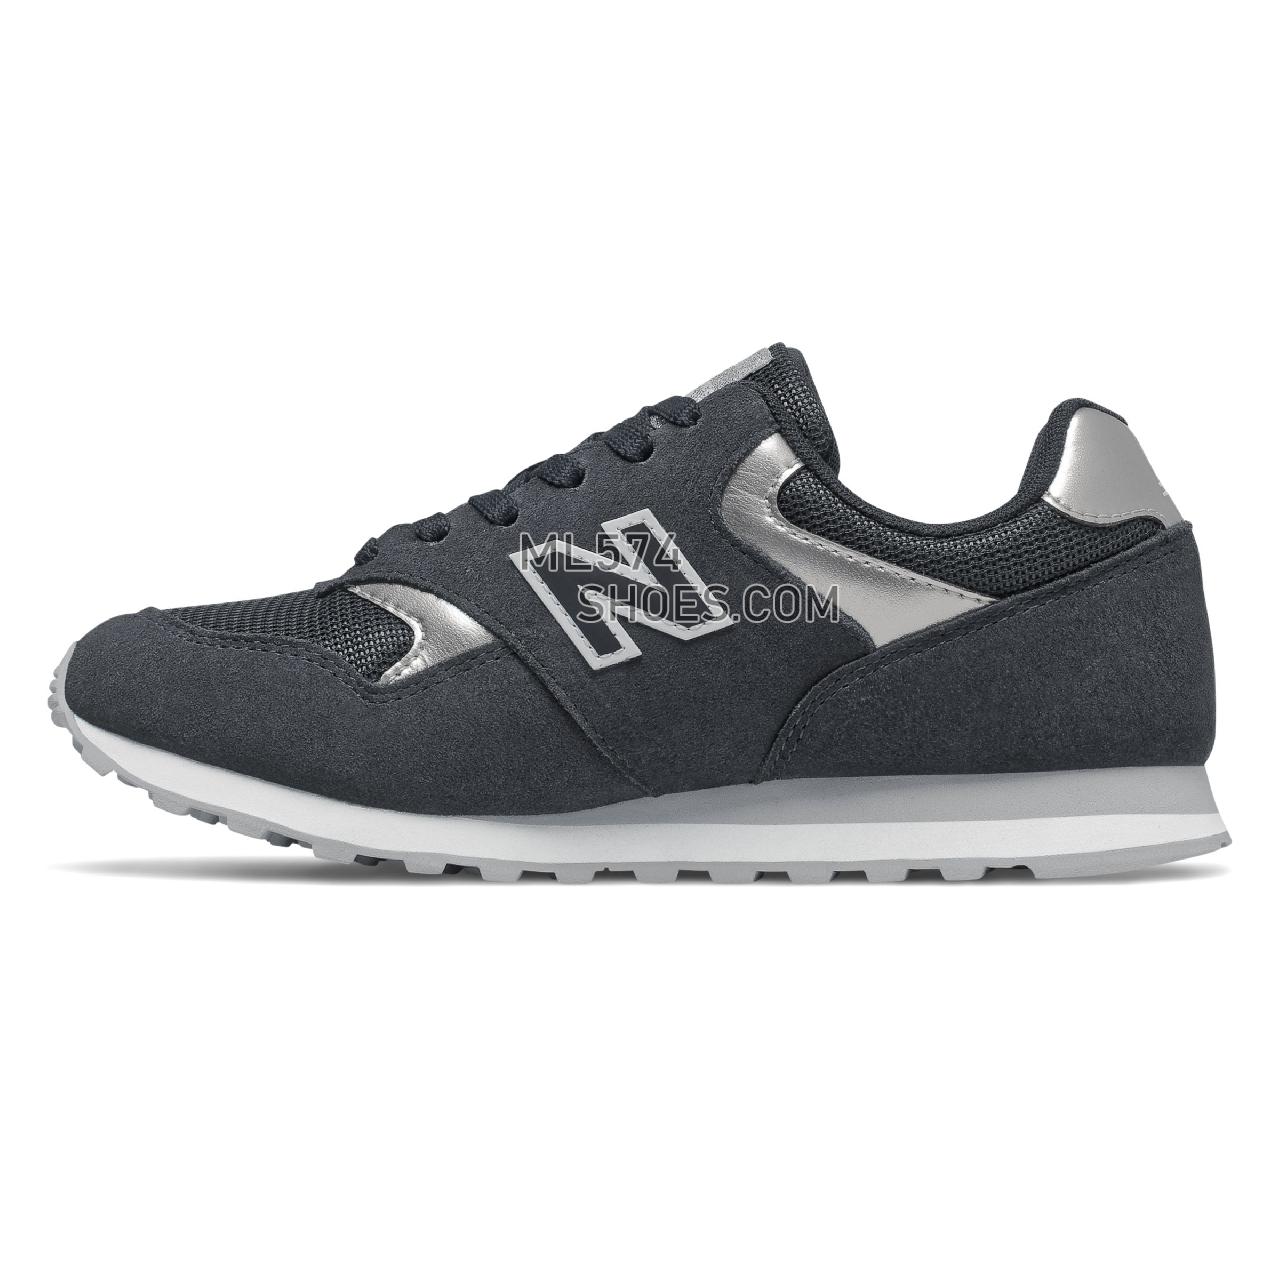 New Balance 393 - Women's Classic Sneakers - Outerspace with SILVER METALLIC - WL393MLC